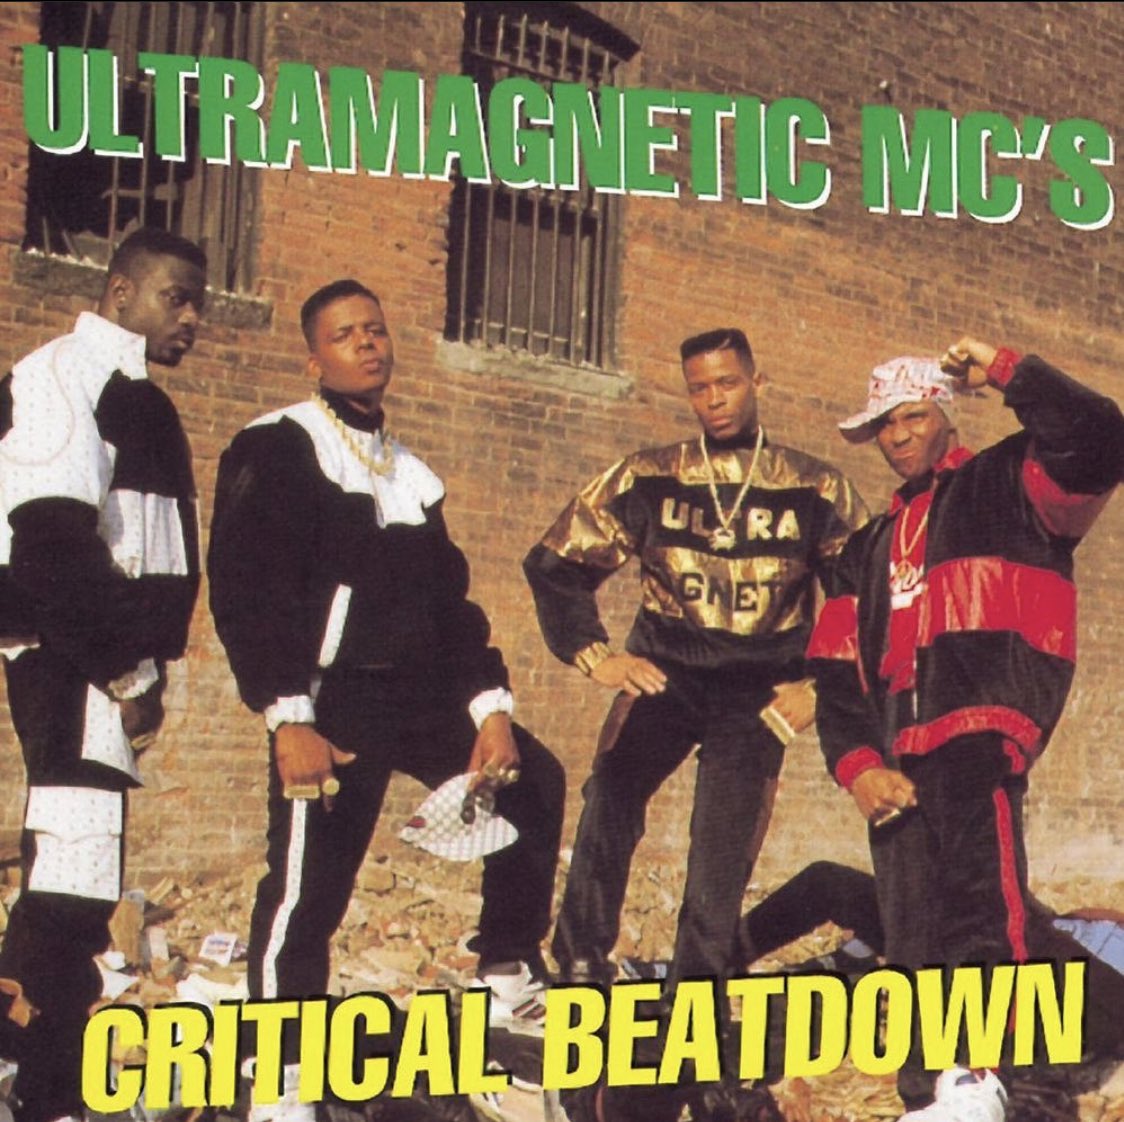 32nd anniversary today! 
Bad ass album....#hiphop #ultramagneticmcs